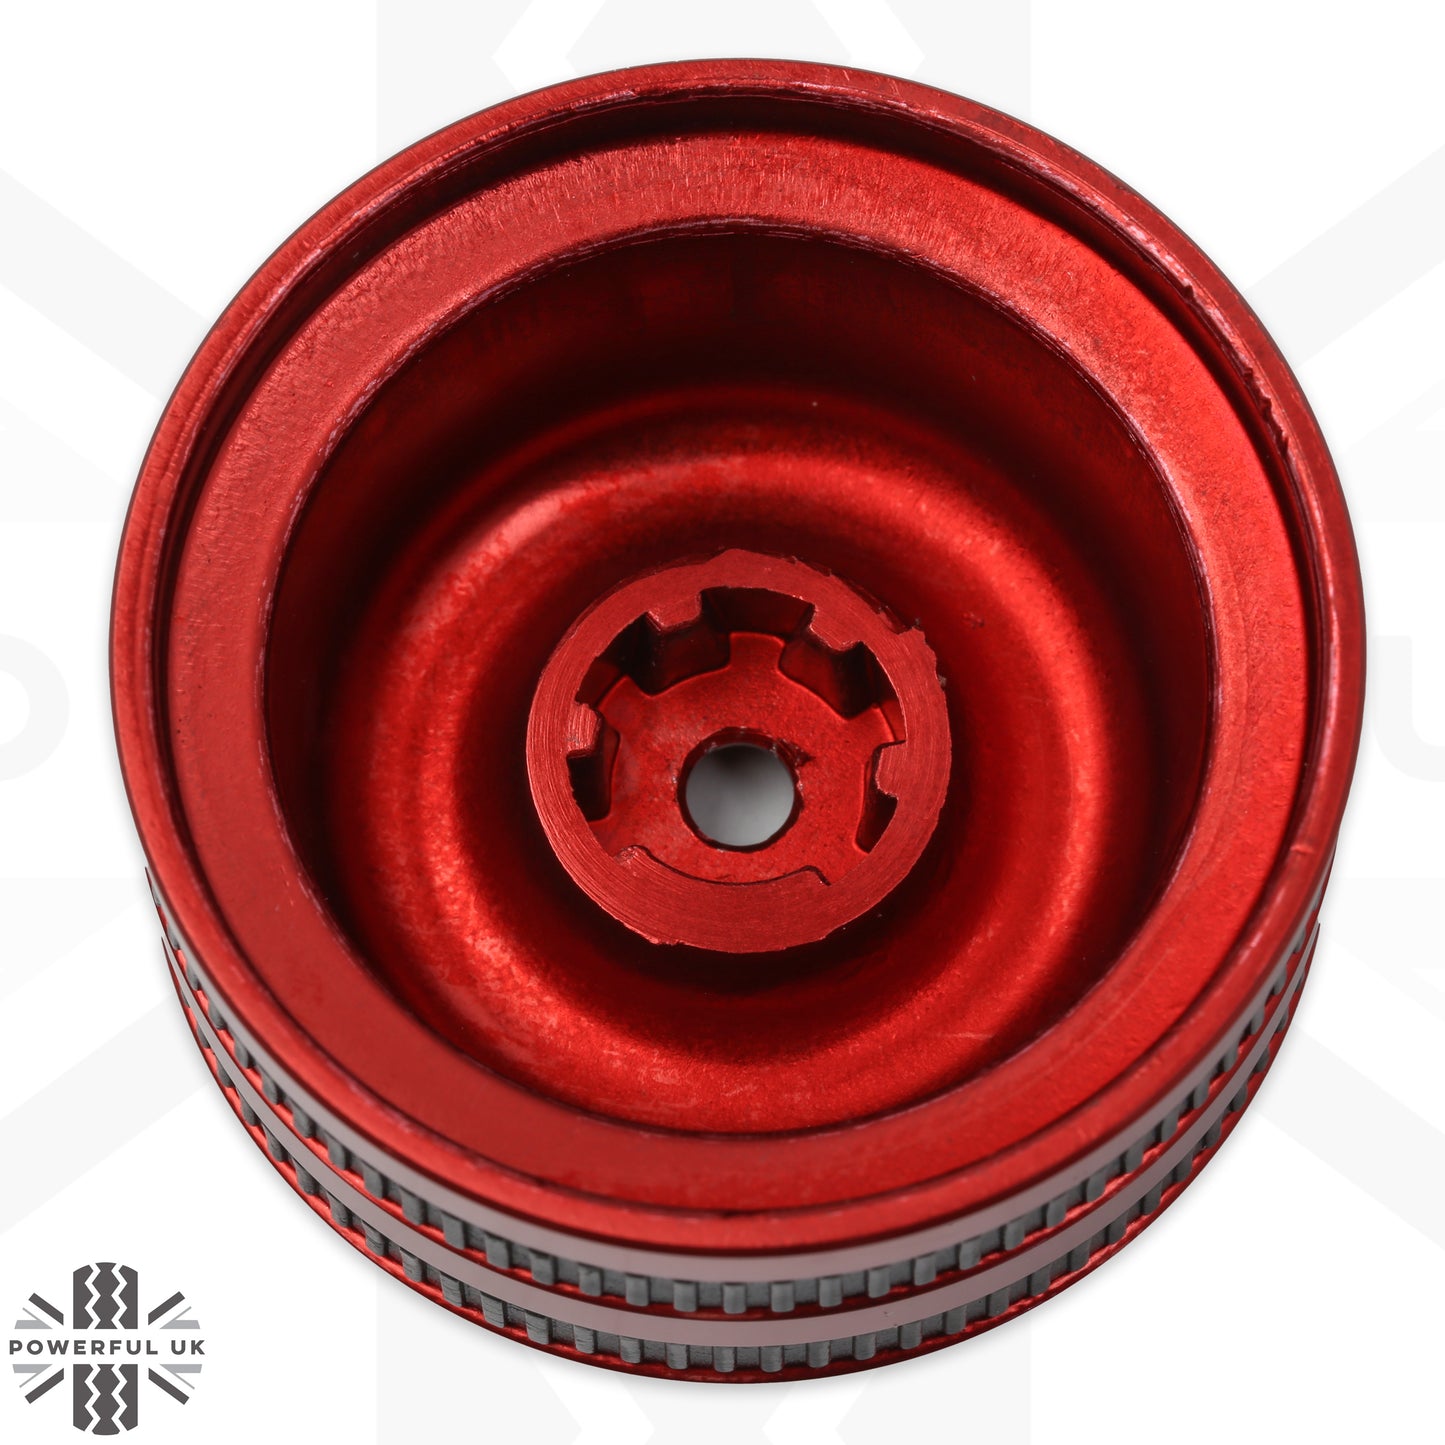 Rotary Shifter in Red - Type 2 - Genuine - for Range Rover Evoque (2011-18)